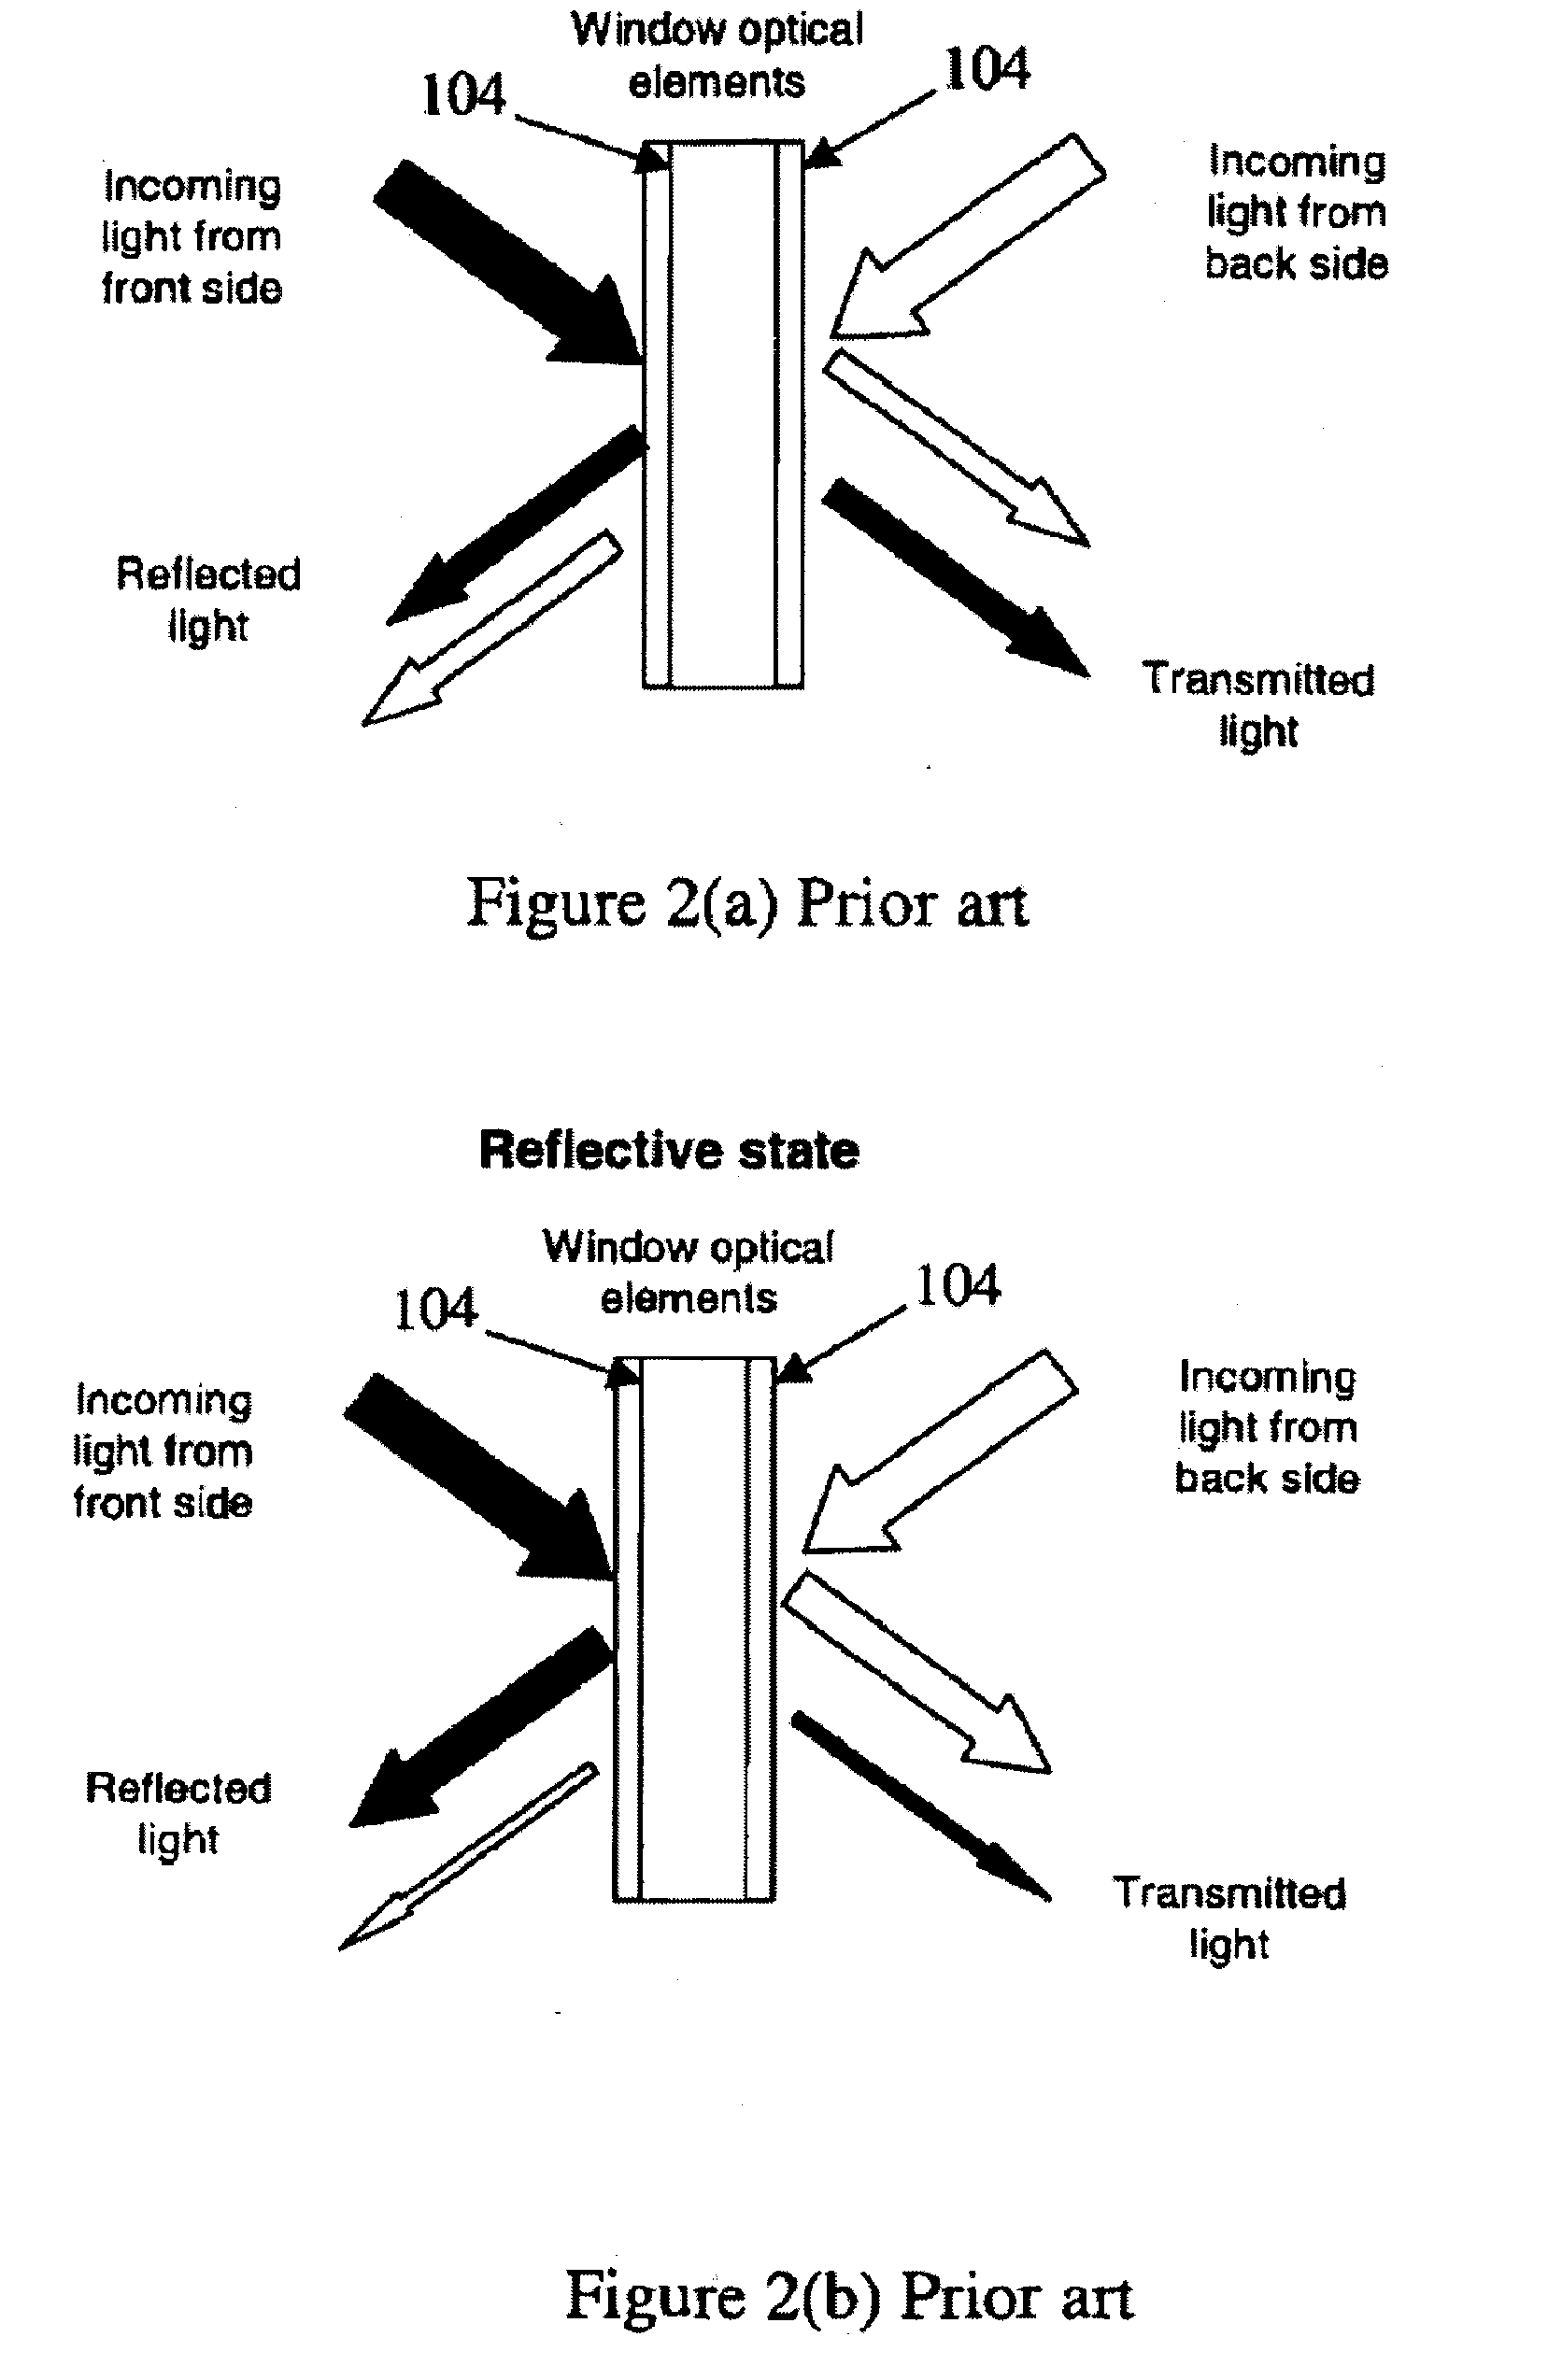 Windows with electrically controllable transmission and reflection